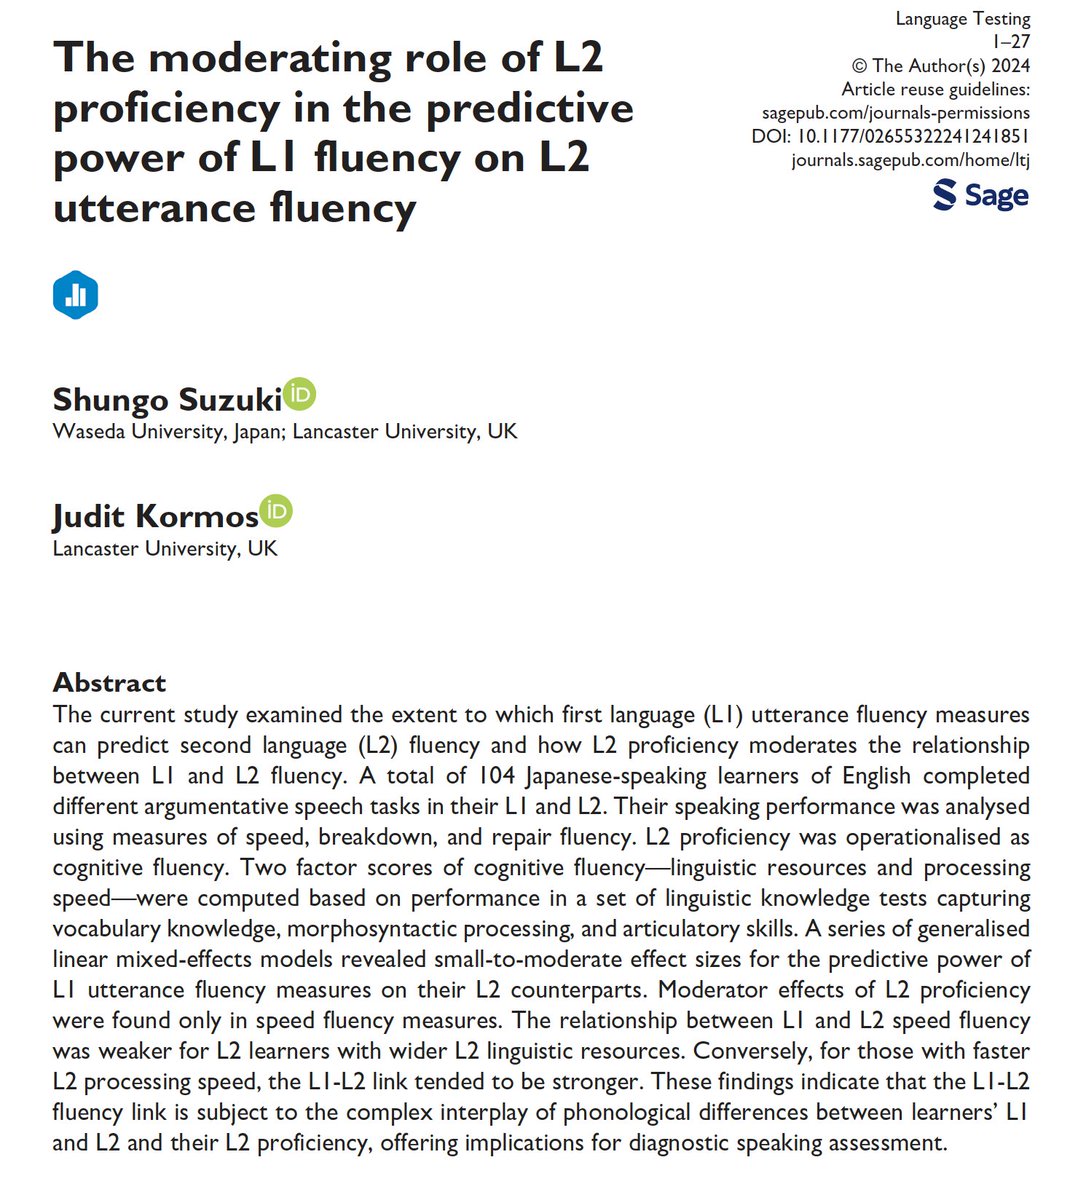 Now available in Online First, @shungosuzuki and @juditkormos examine L1 Japanese fluency measures as predictors of the corresponding L2 English measures in an argumentative task and explore the extent of cognitive fluency scores as a moderating factor. journals.sagepub.com/doi/full/10.11…